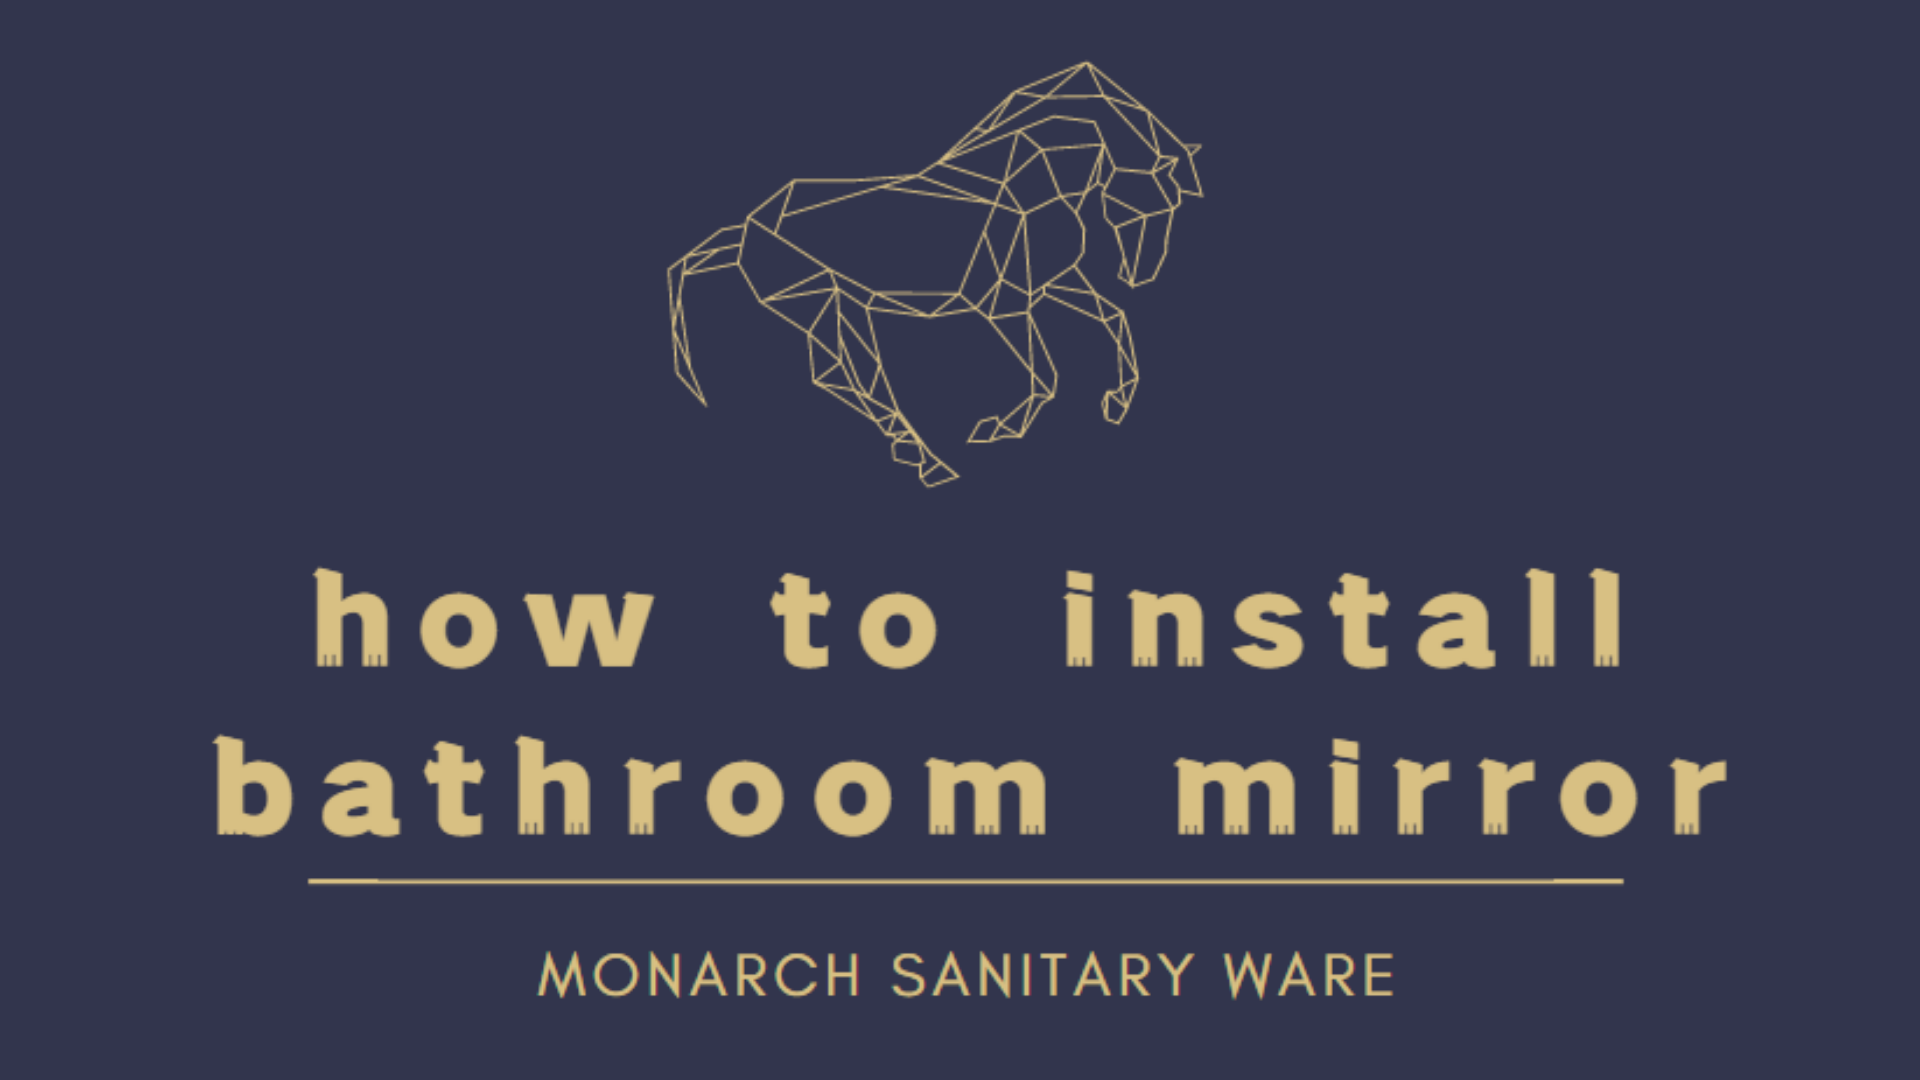 How to install bathroom mirror